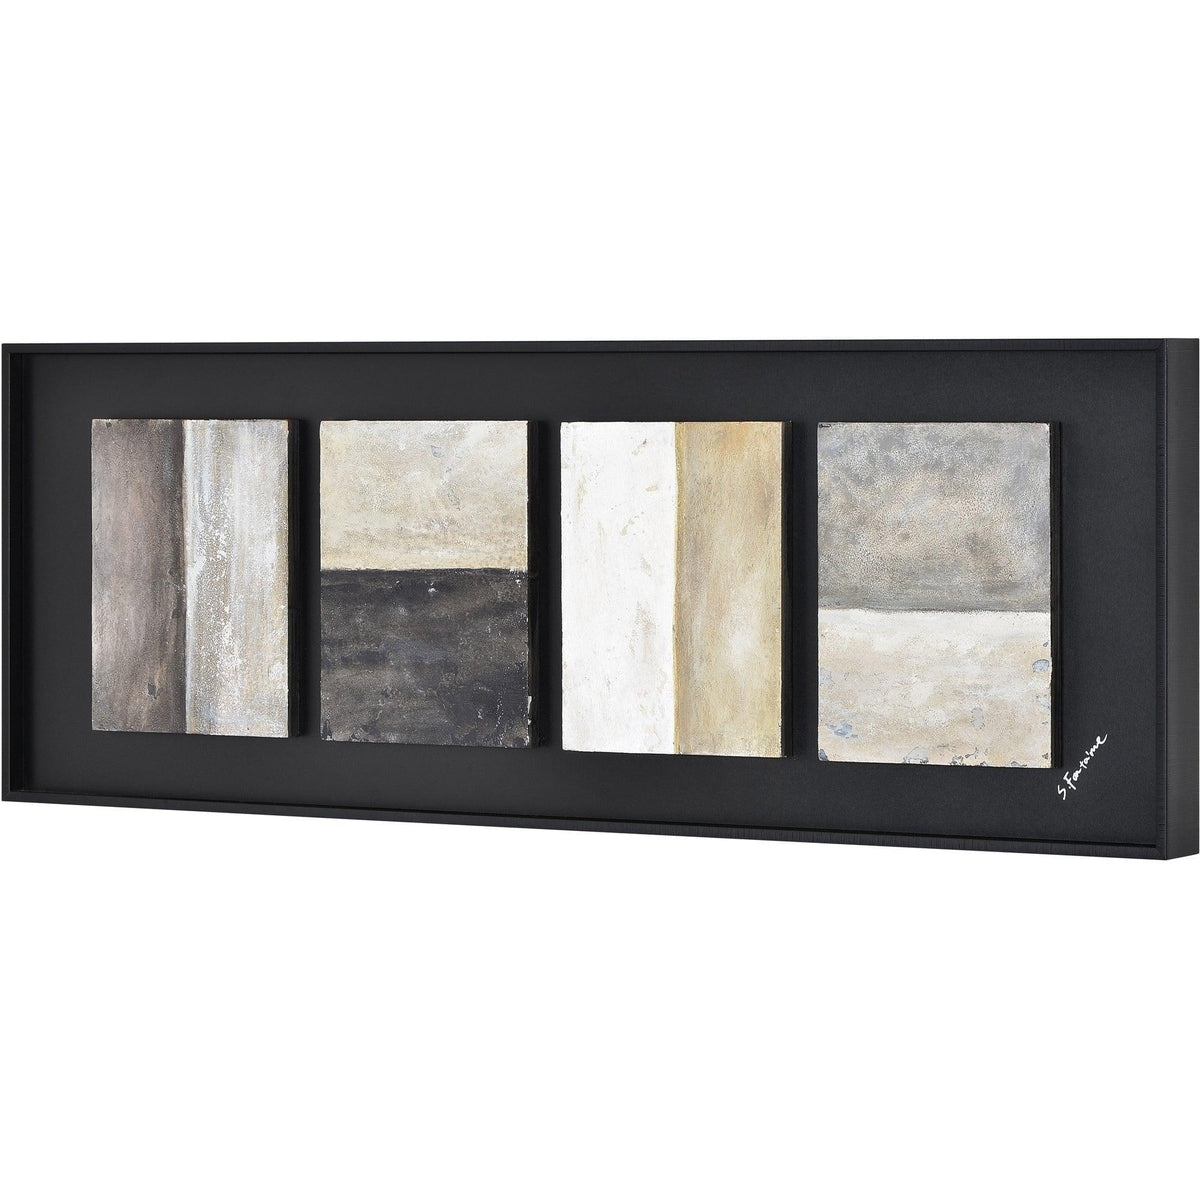 Renwil - Macaza Wall Décor - W6696 | Montreal Lighting & Hardware